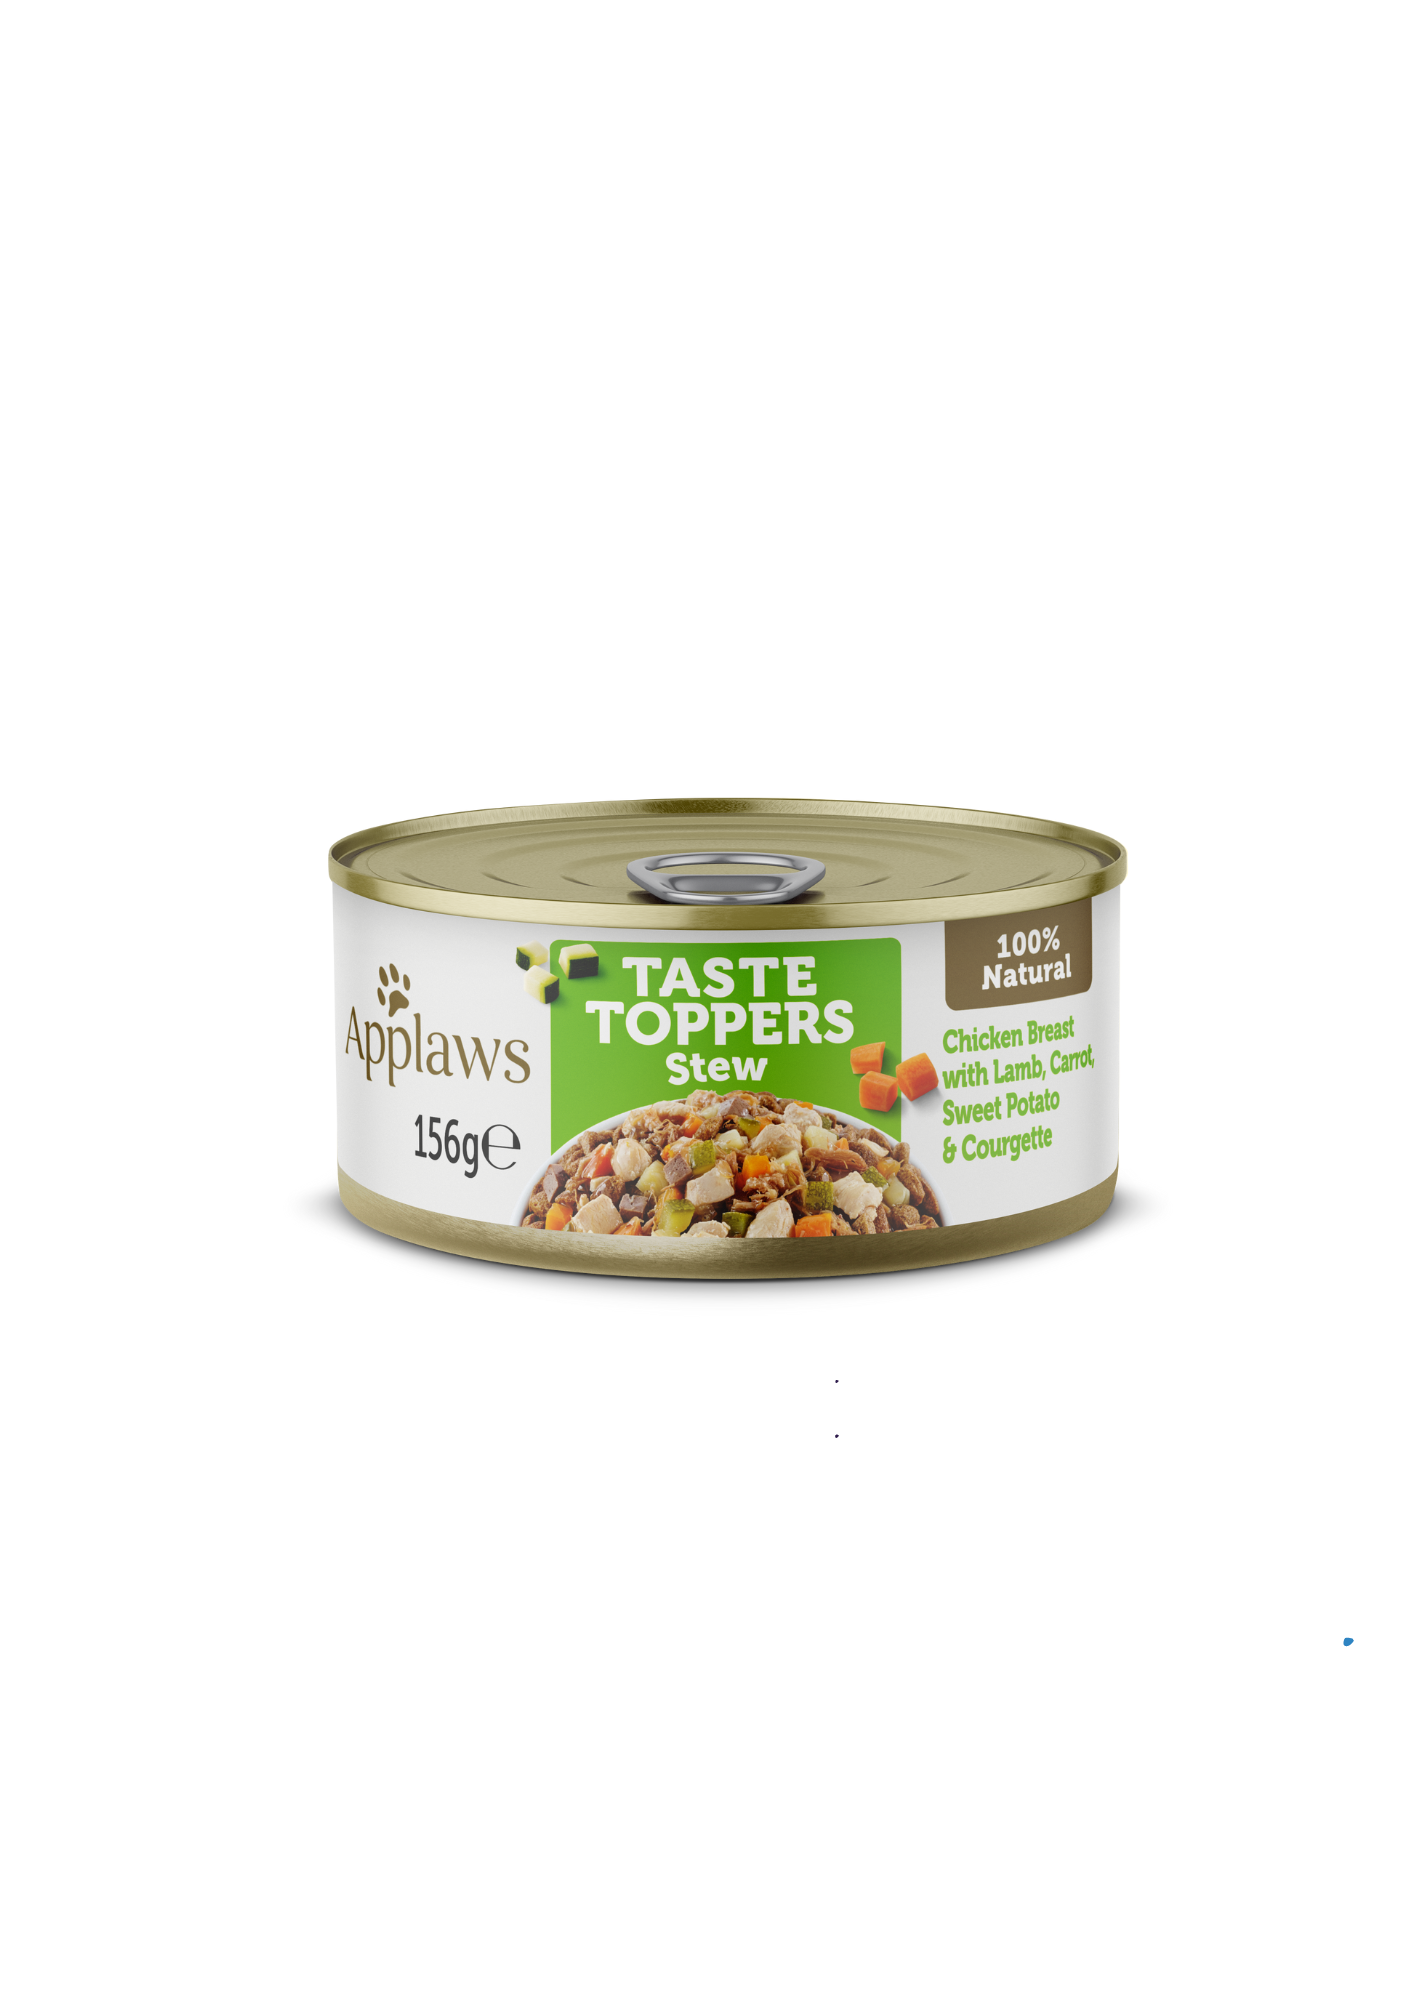 Applaws Taste Toppers All Life Stage Dog Topper - Stew Chicken with Lamb, Carrots, Courgette & Sweet Potato, 100% Natural Complements Dry Dog Food, Grain Free, 156 g